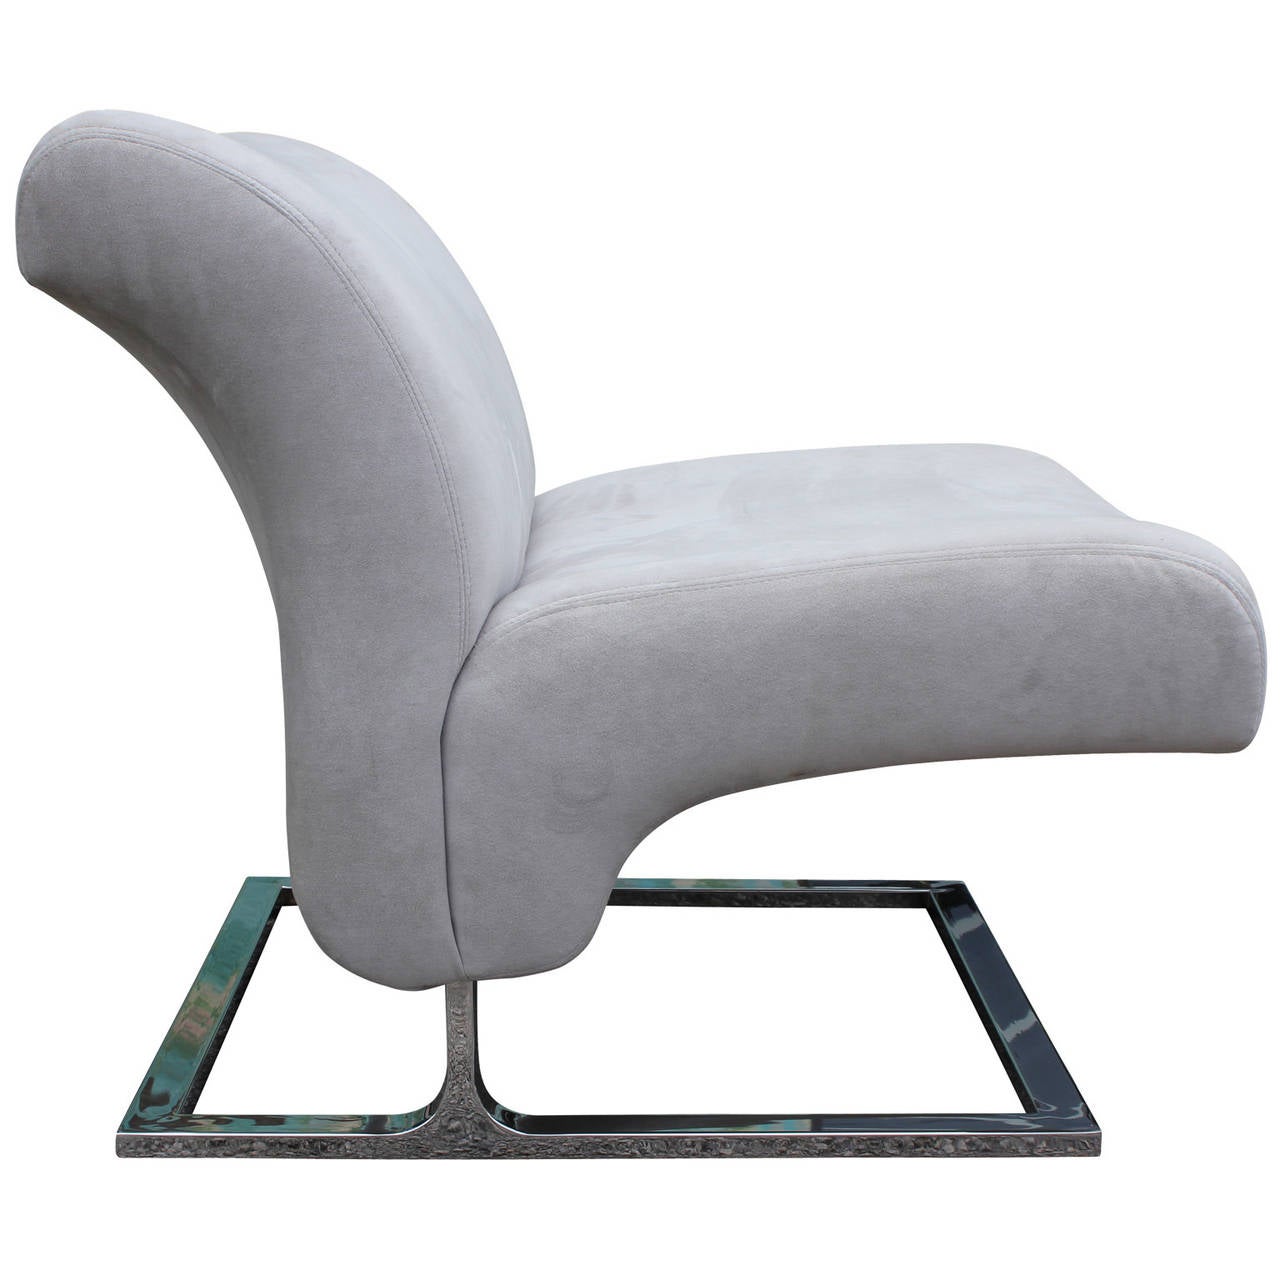 Mid-Century Modern Elegant Chrome and Grey Suede Cantilevered Lounge Chairs Saporiti Style